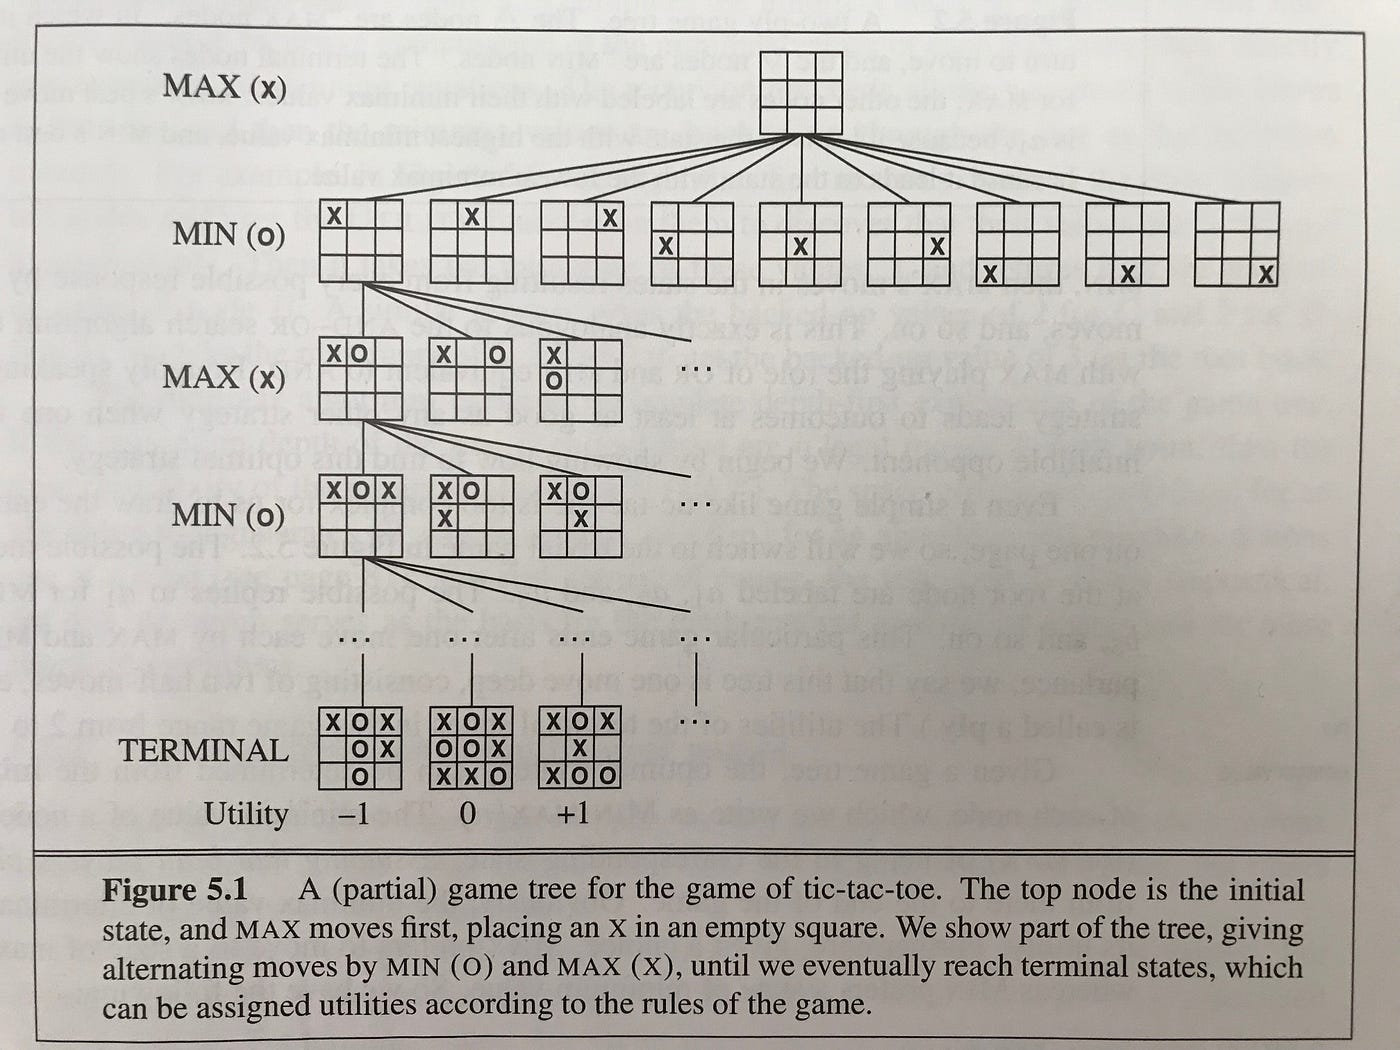 What algorithm for a tic-tac-toe game can I use to determine the